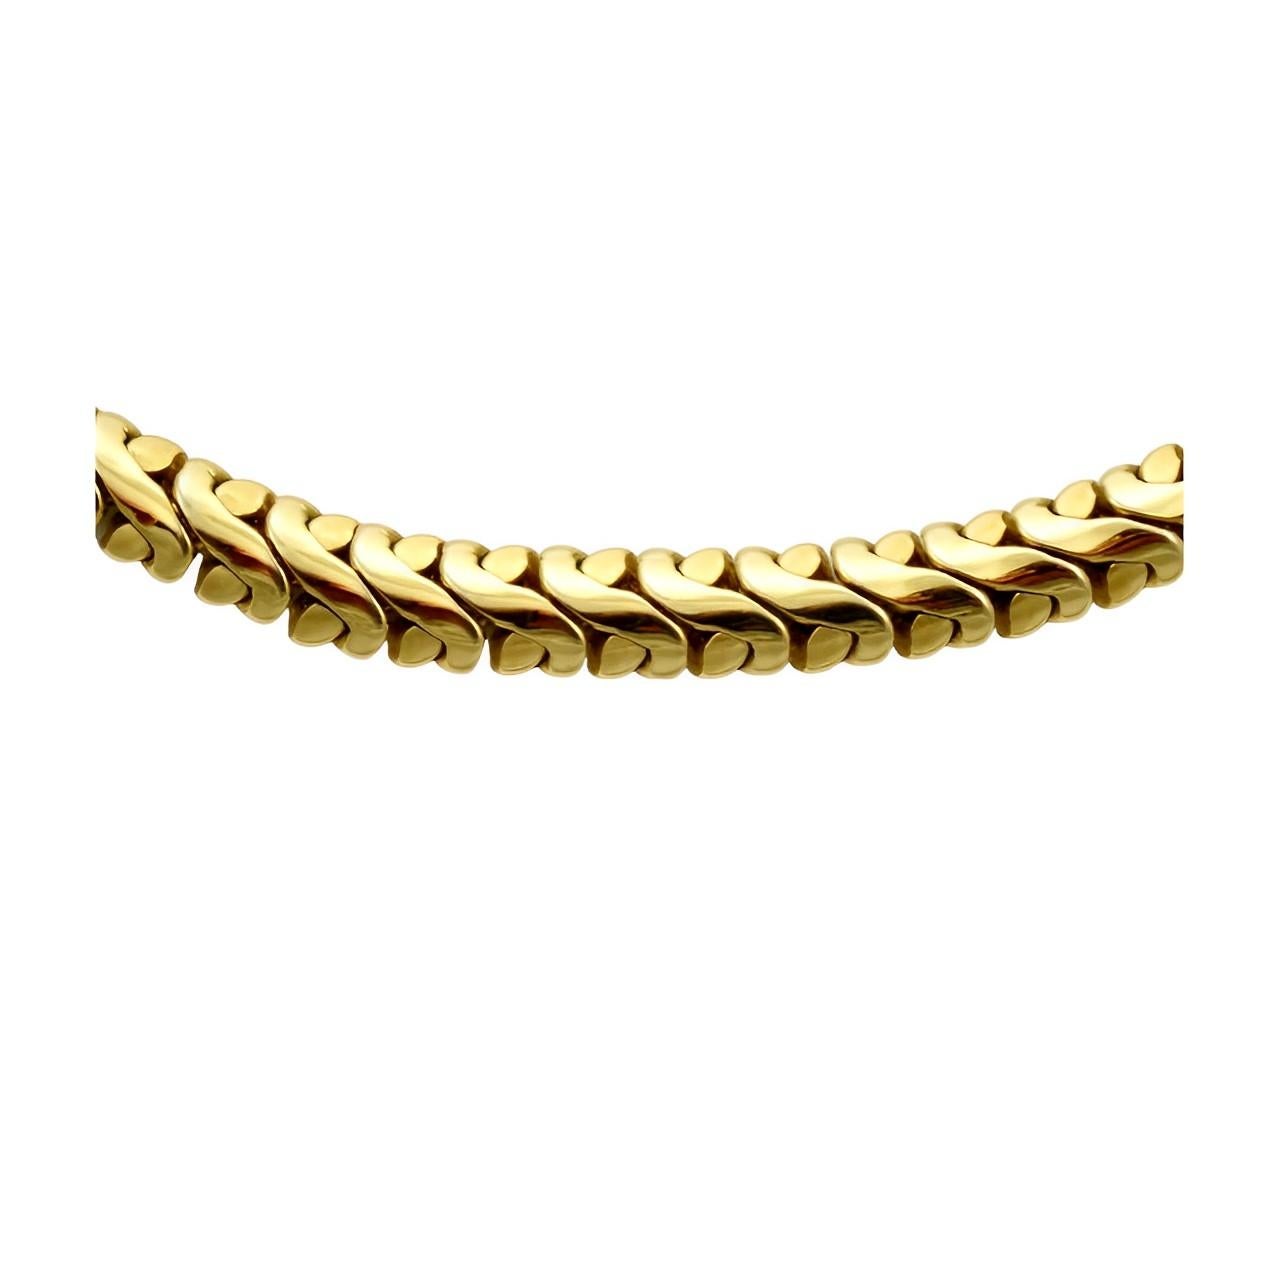 Stylish gold plated heavy chain with a great fancy link design. Measuring length 41.8 cm / 16.45 inches by width 7 mm / .27 inch.

This is a quality chain necklace, circa 1980s.